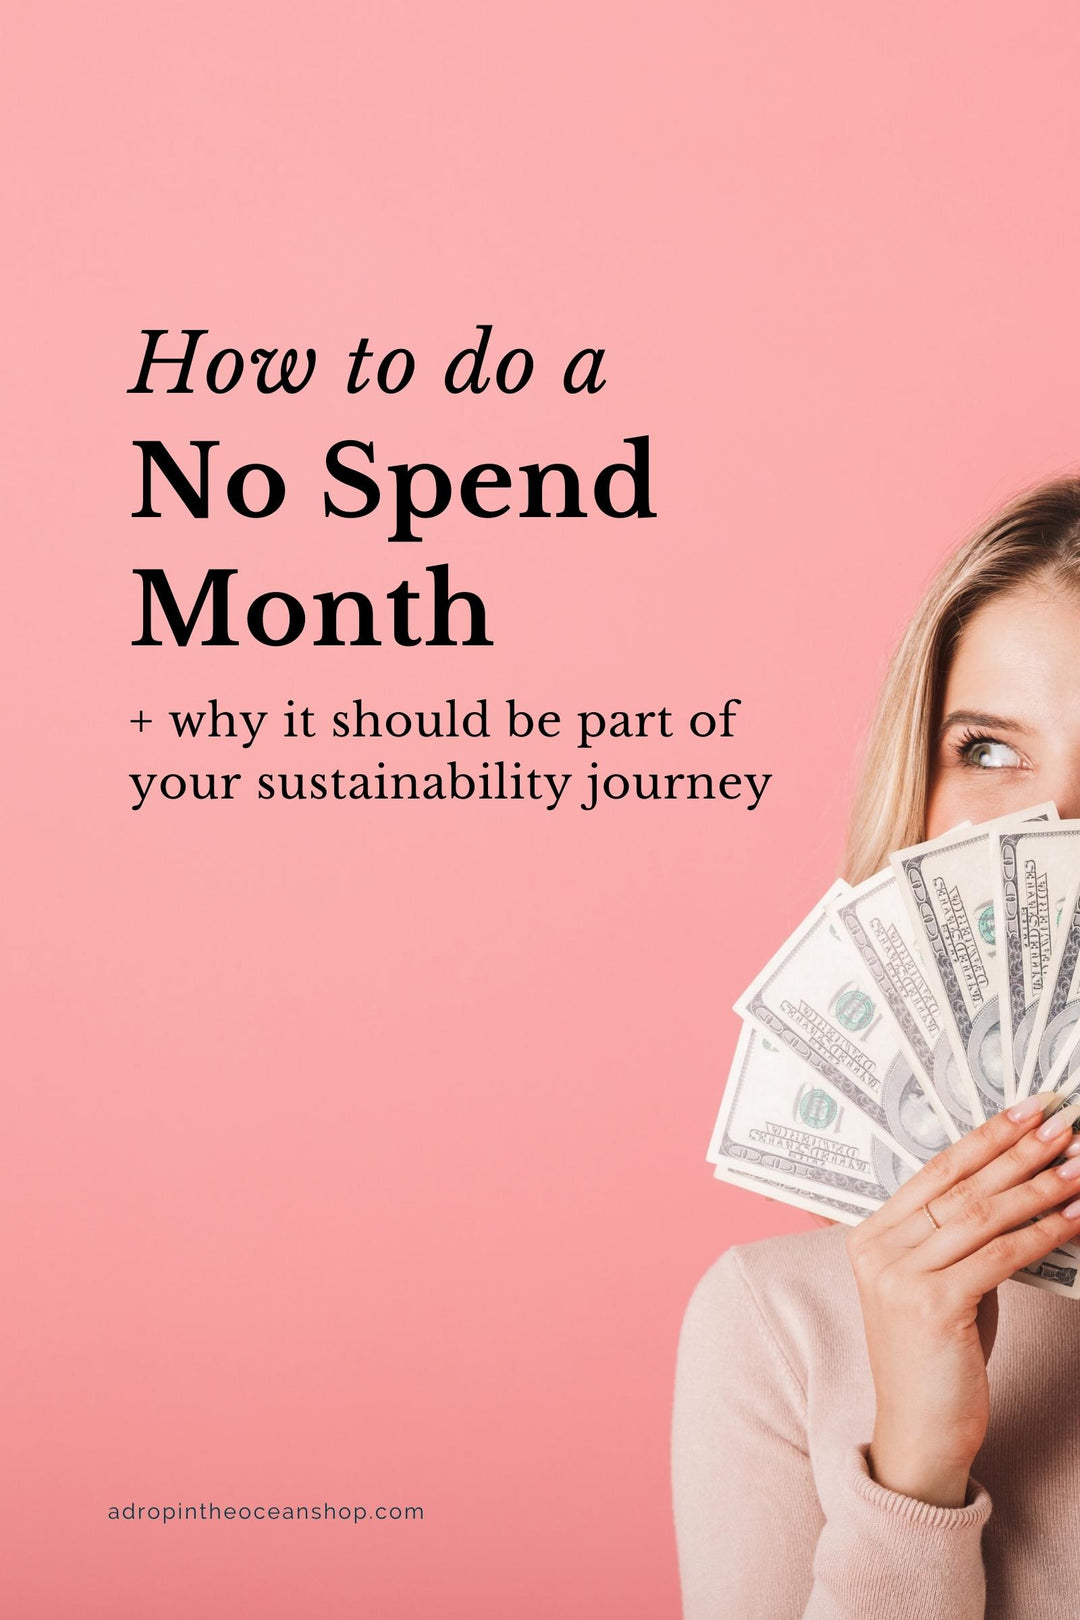 A Drop in the Ocean Blog: How to do a No Spend Month